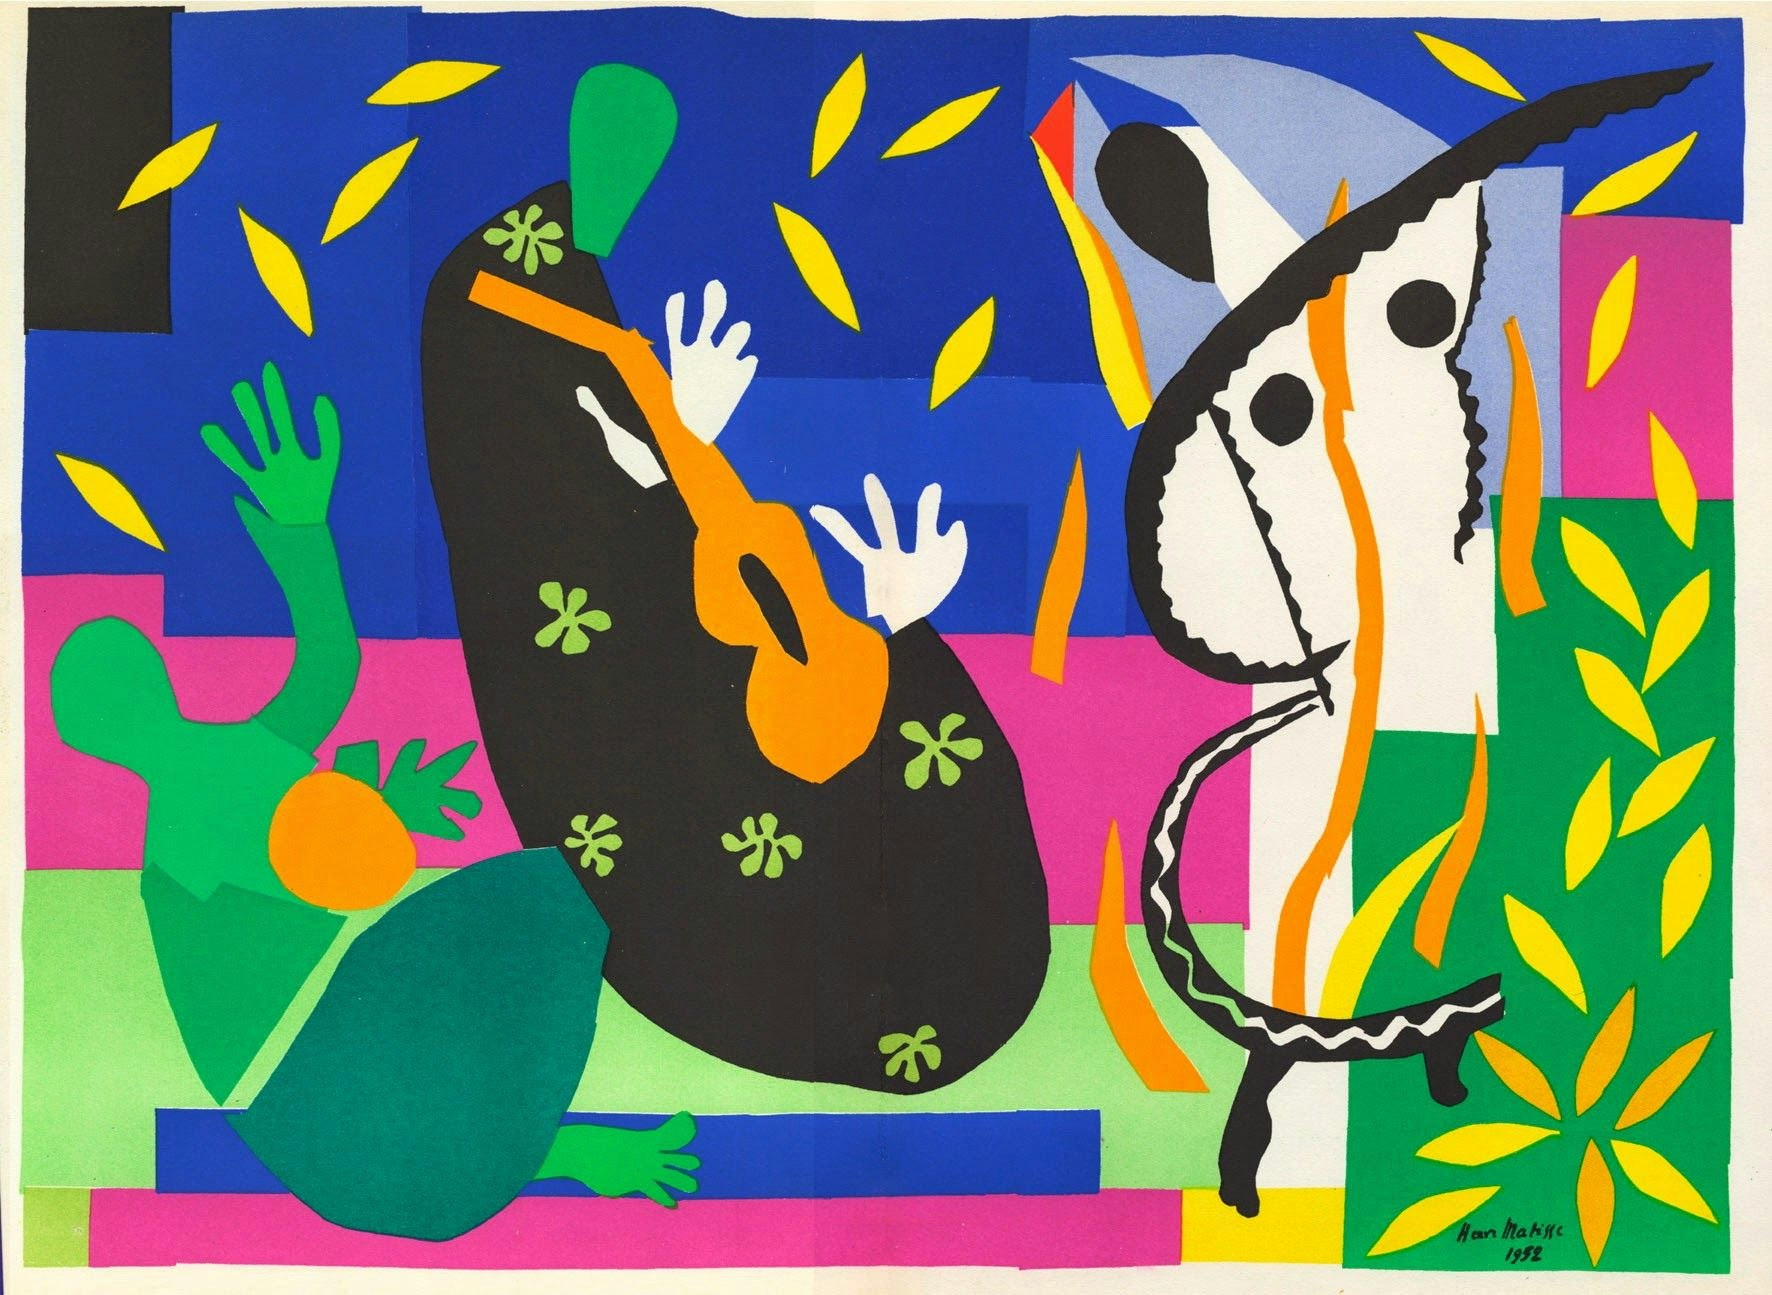 Henri Matisse created in 1952 in Nice the painting, Sorrow of the King